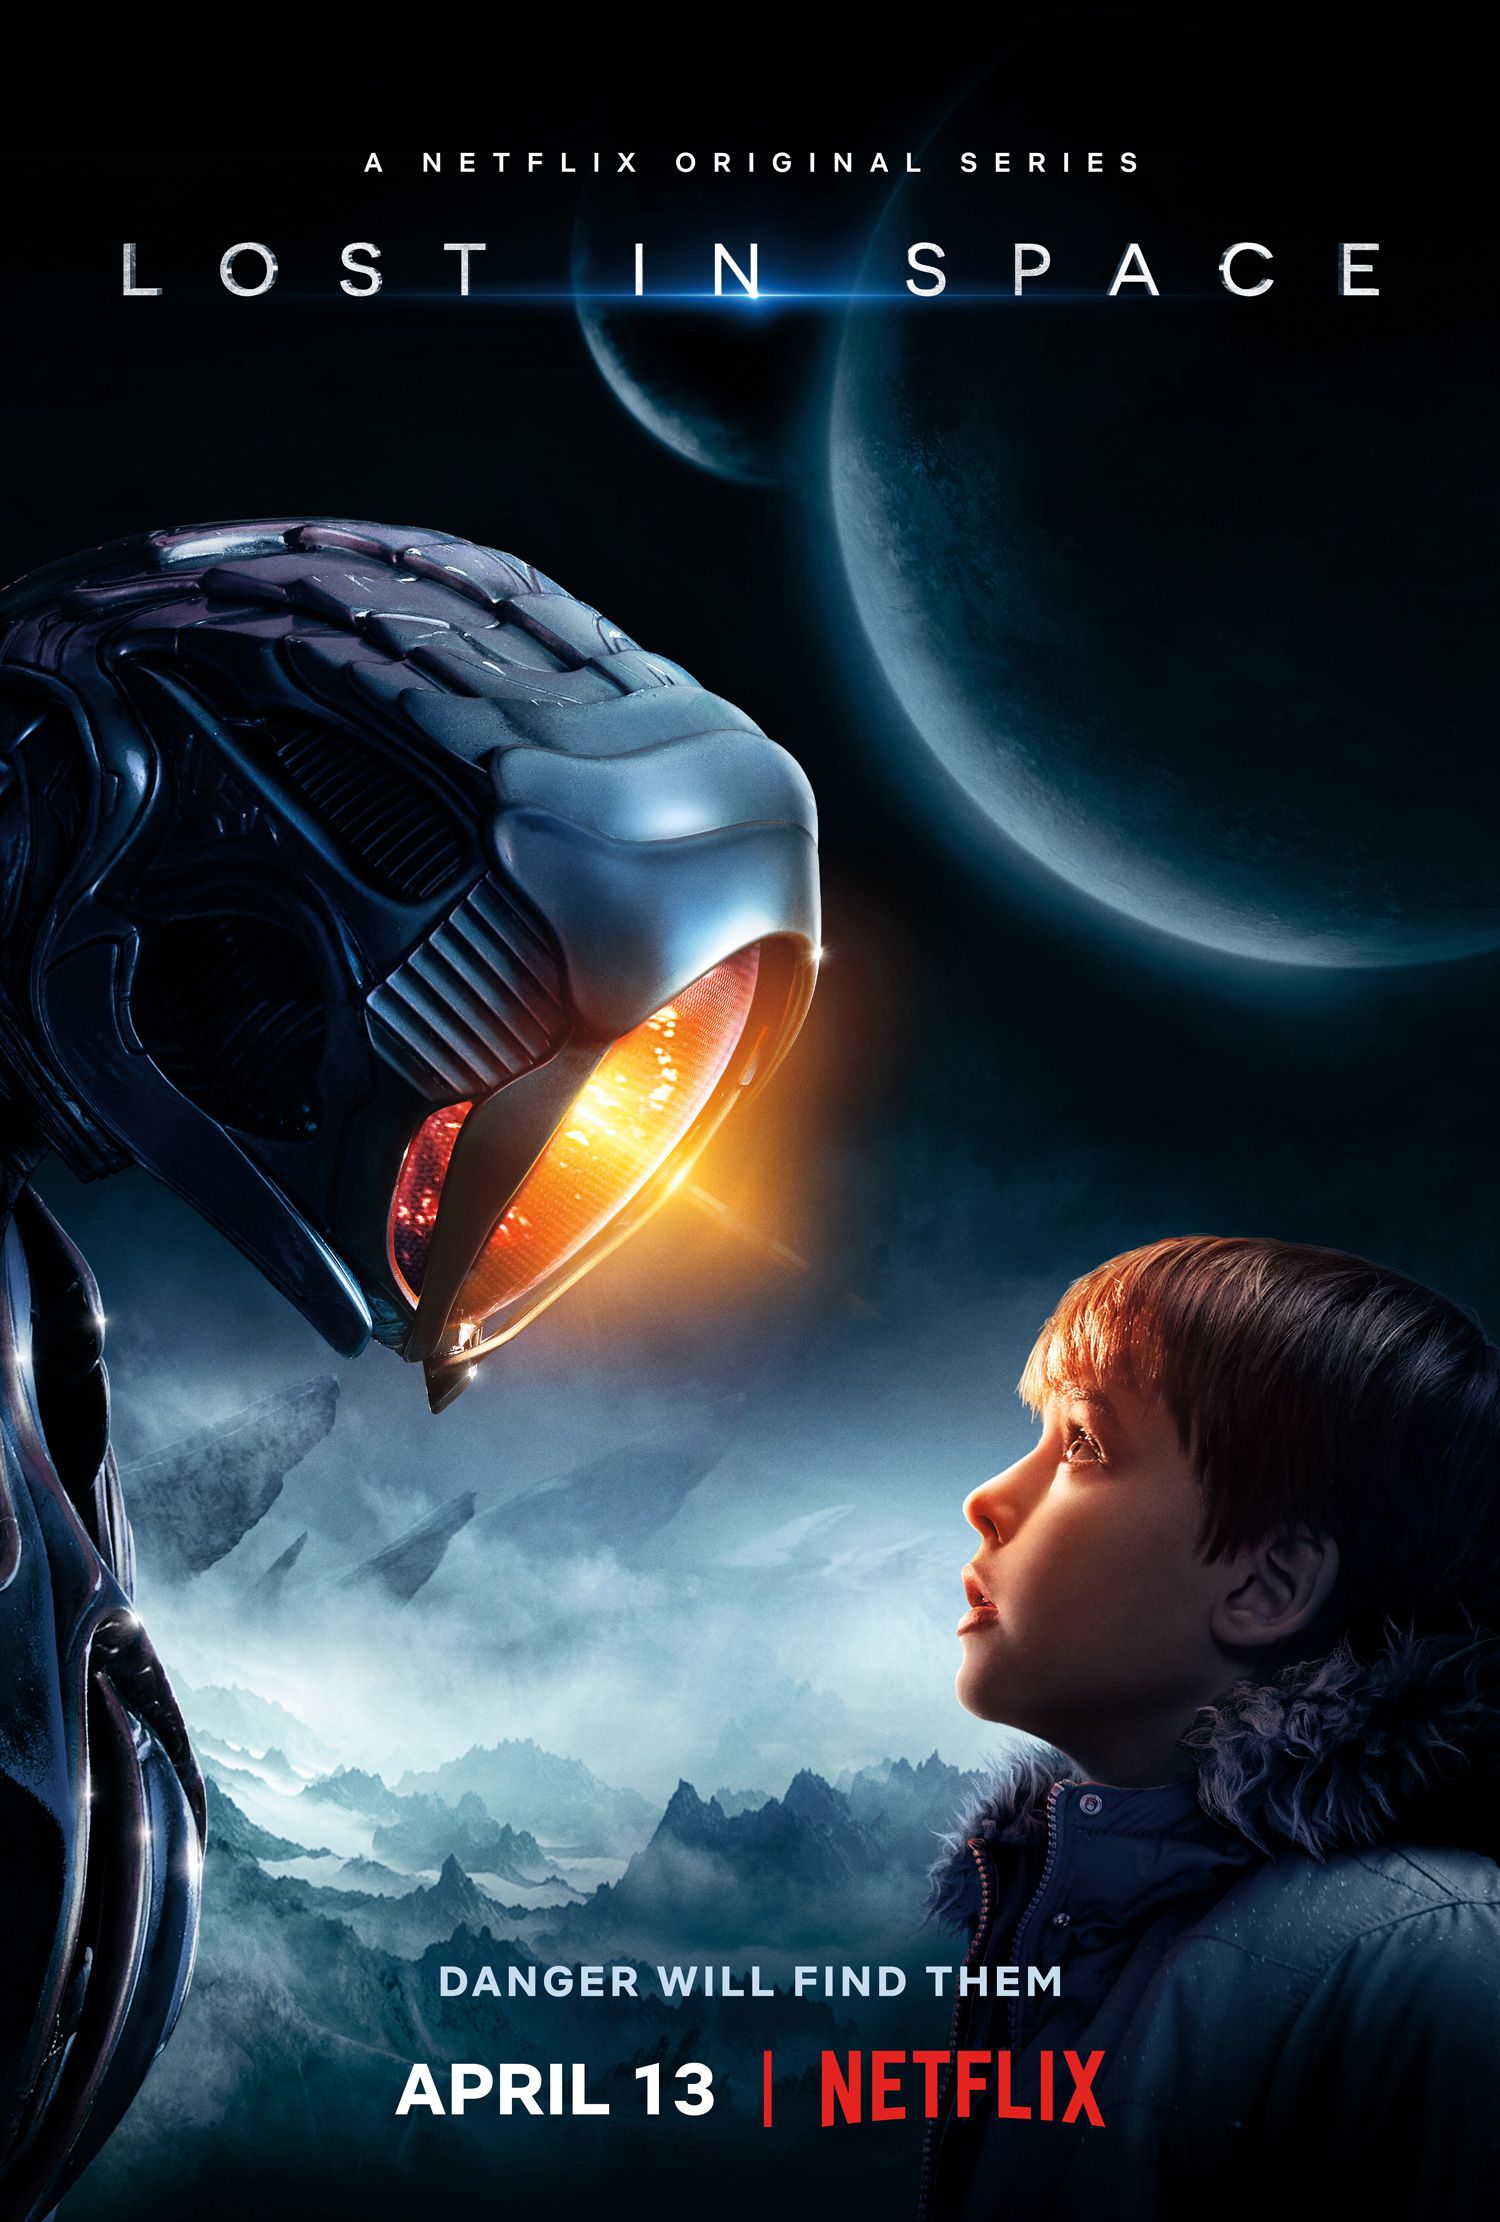 Lost in Space Netflix poster